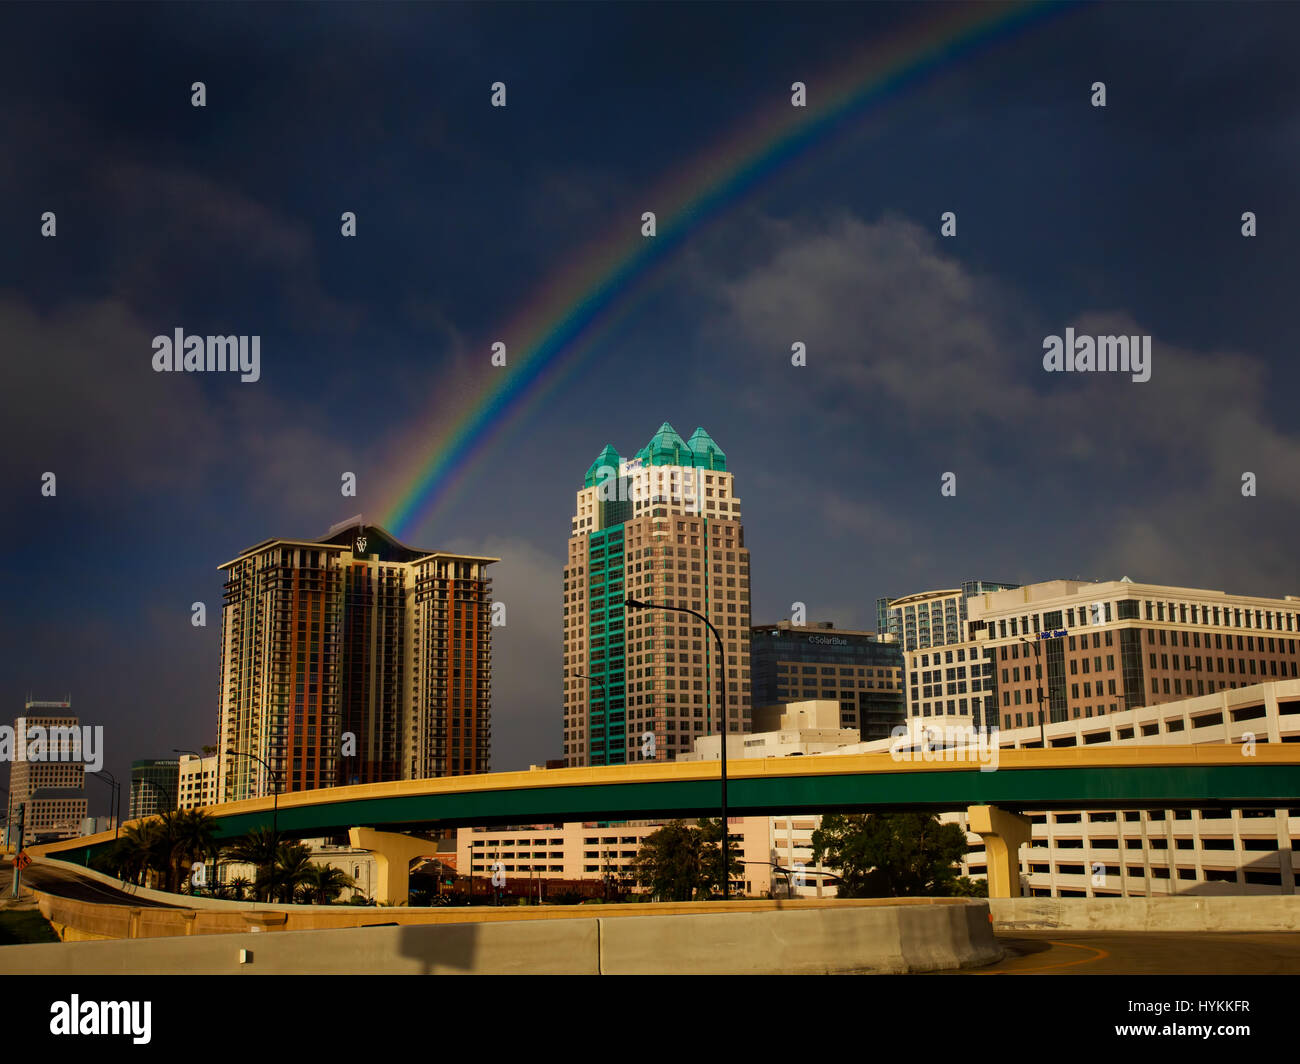 LIKE A ray of hope photos of the rainbow symbol of the gay community over downtown Orlando has been released by a local photographer in defiance of terrorism. After the Islamic terror attack last week that left 49 people at a gay nightclub dead, the city of Orlando, Florida has been grappling with the tragedy. So cityscape photographer Reg Garner decided to release his iconic image of the city skyline shrouded by a rainbow and double rainbow. One spectacular shot shows the stunning natural wonder rising from the city’s most iconic and tallest tower, the 441-foot high Suncrest Center. Stock Photo